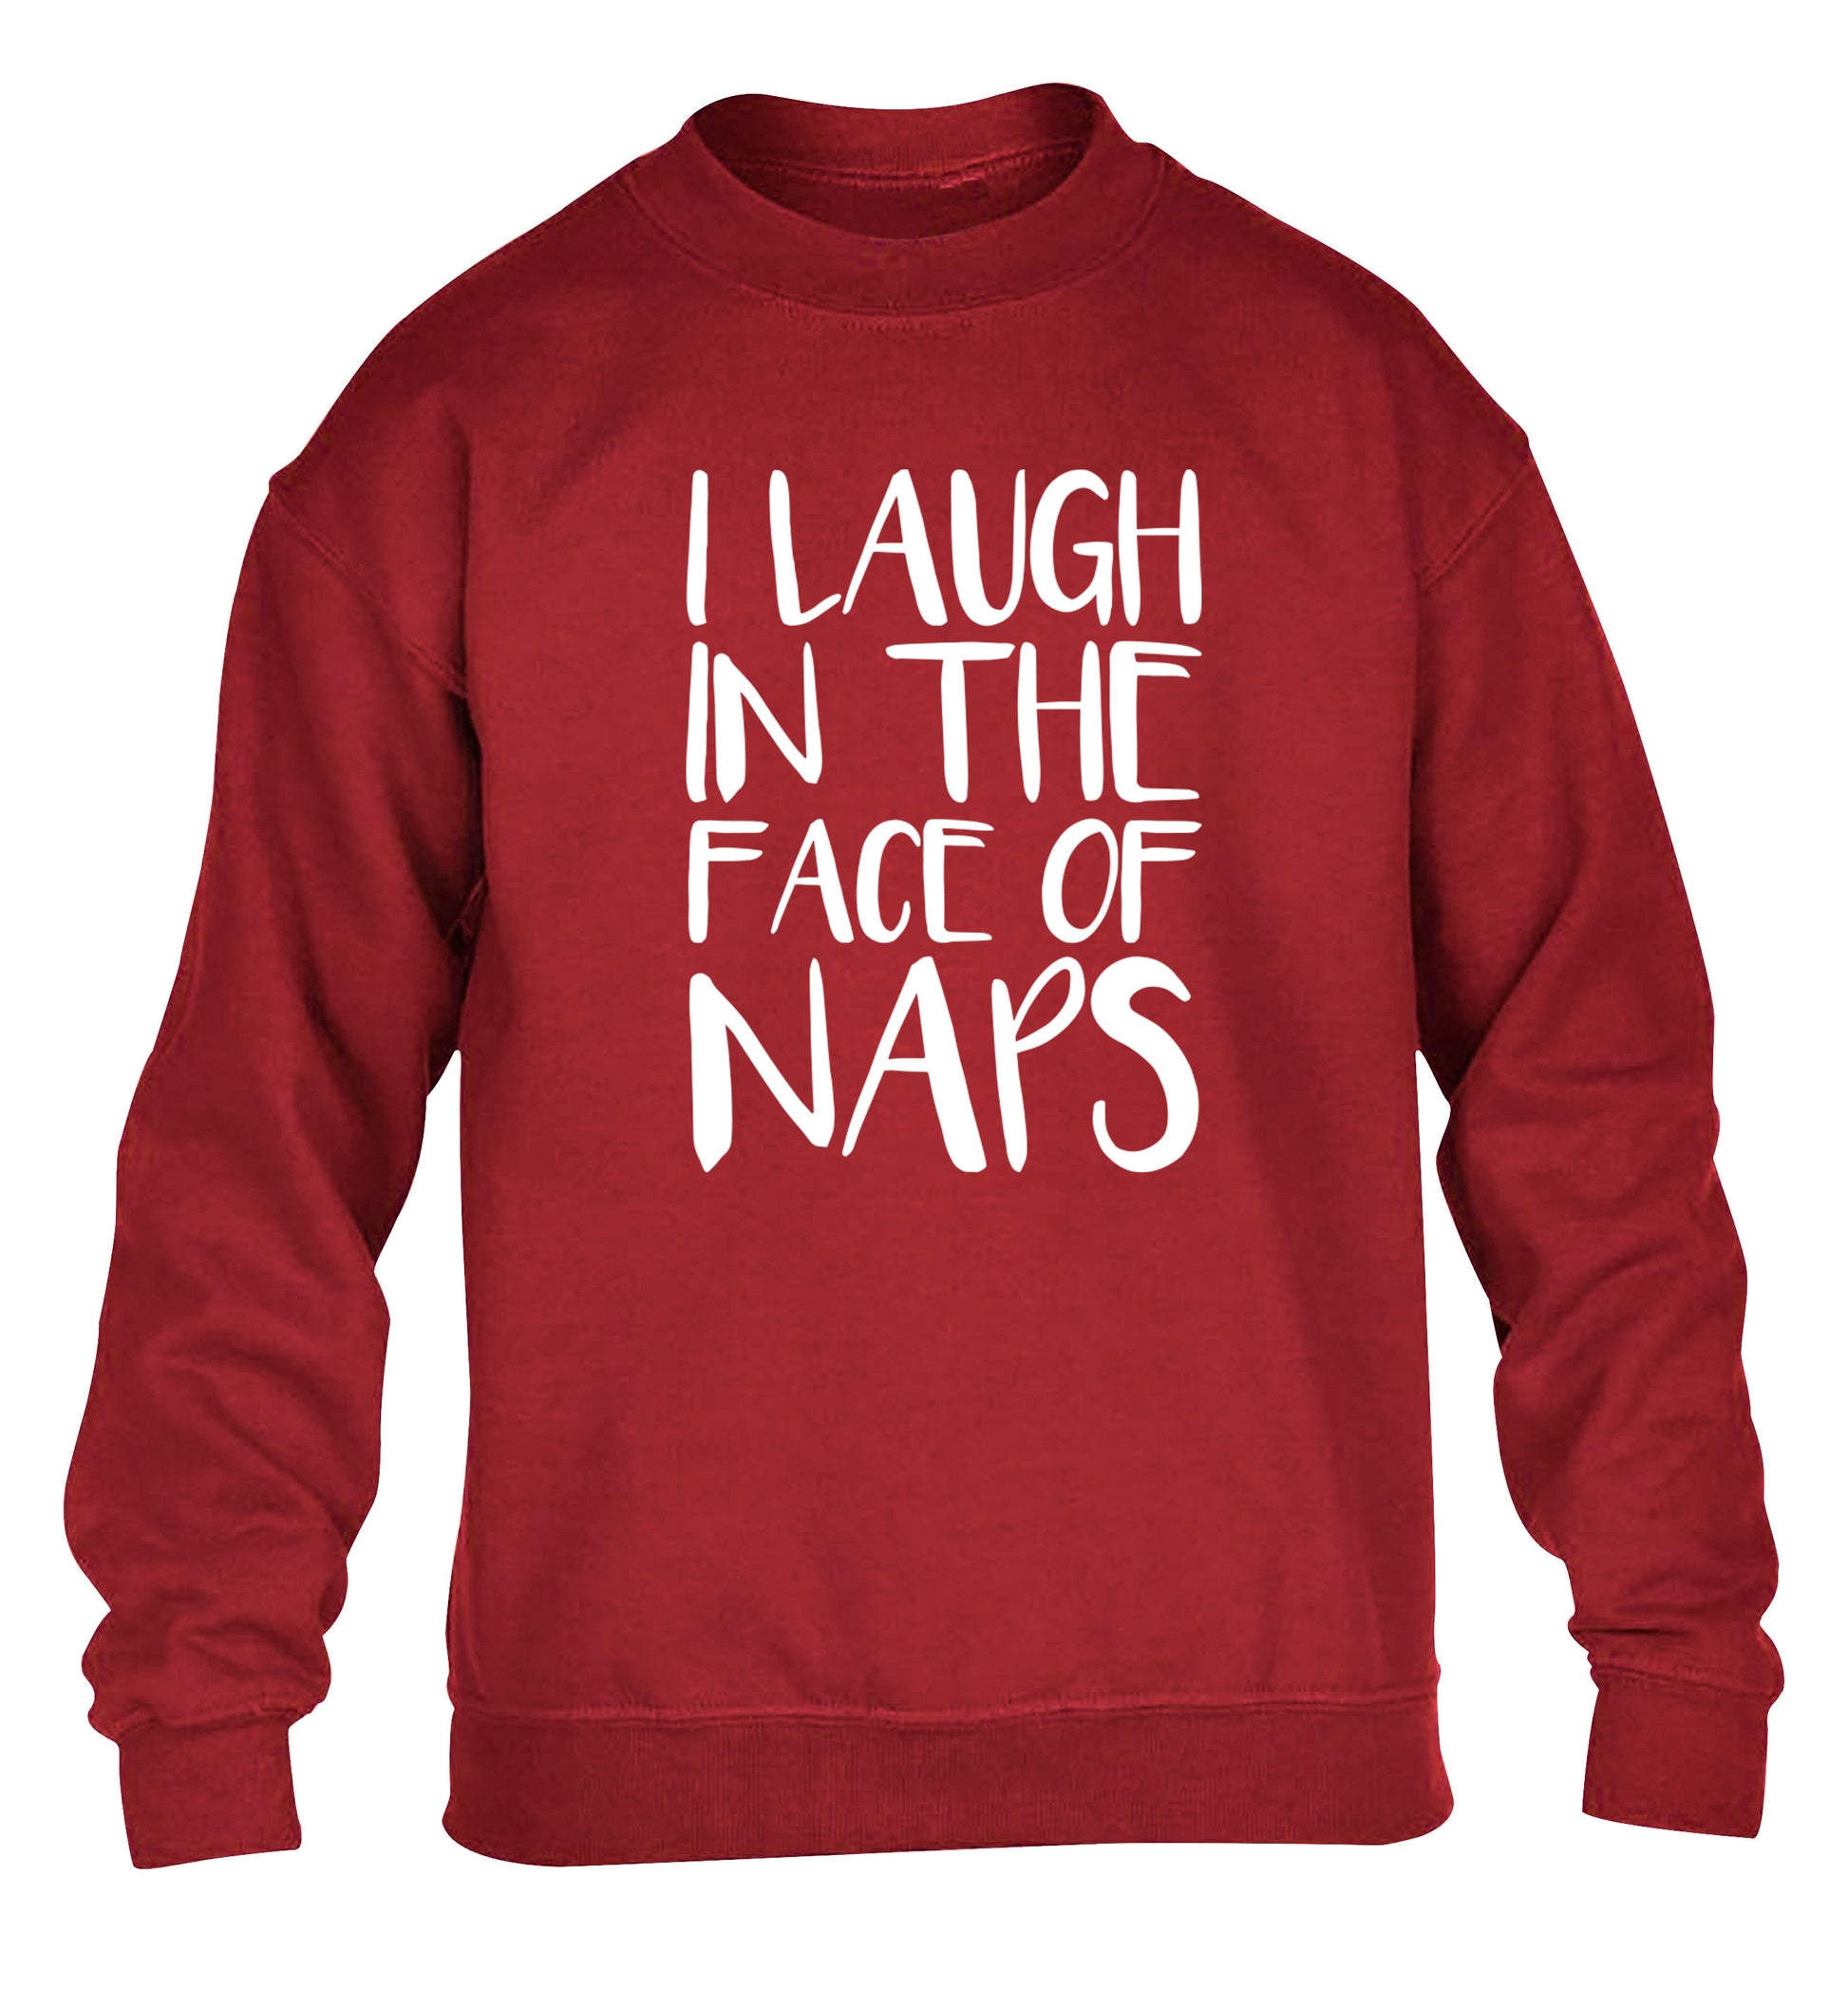 I laugh in the face of naps children's grey sweater 12-14 Years